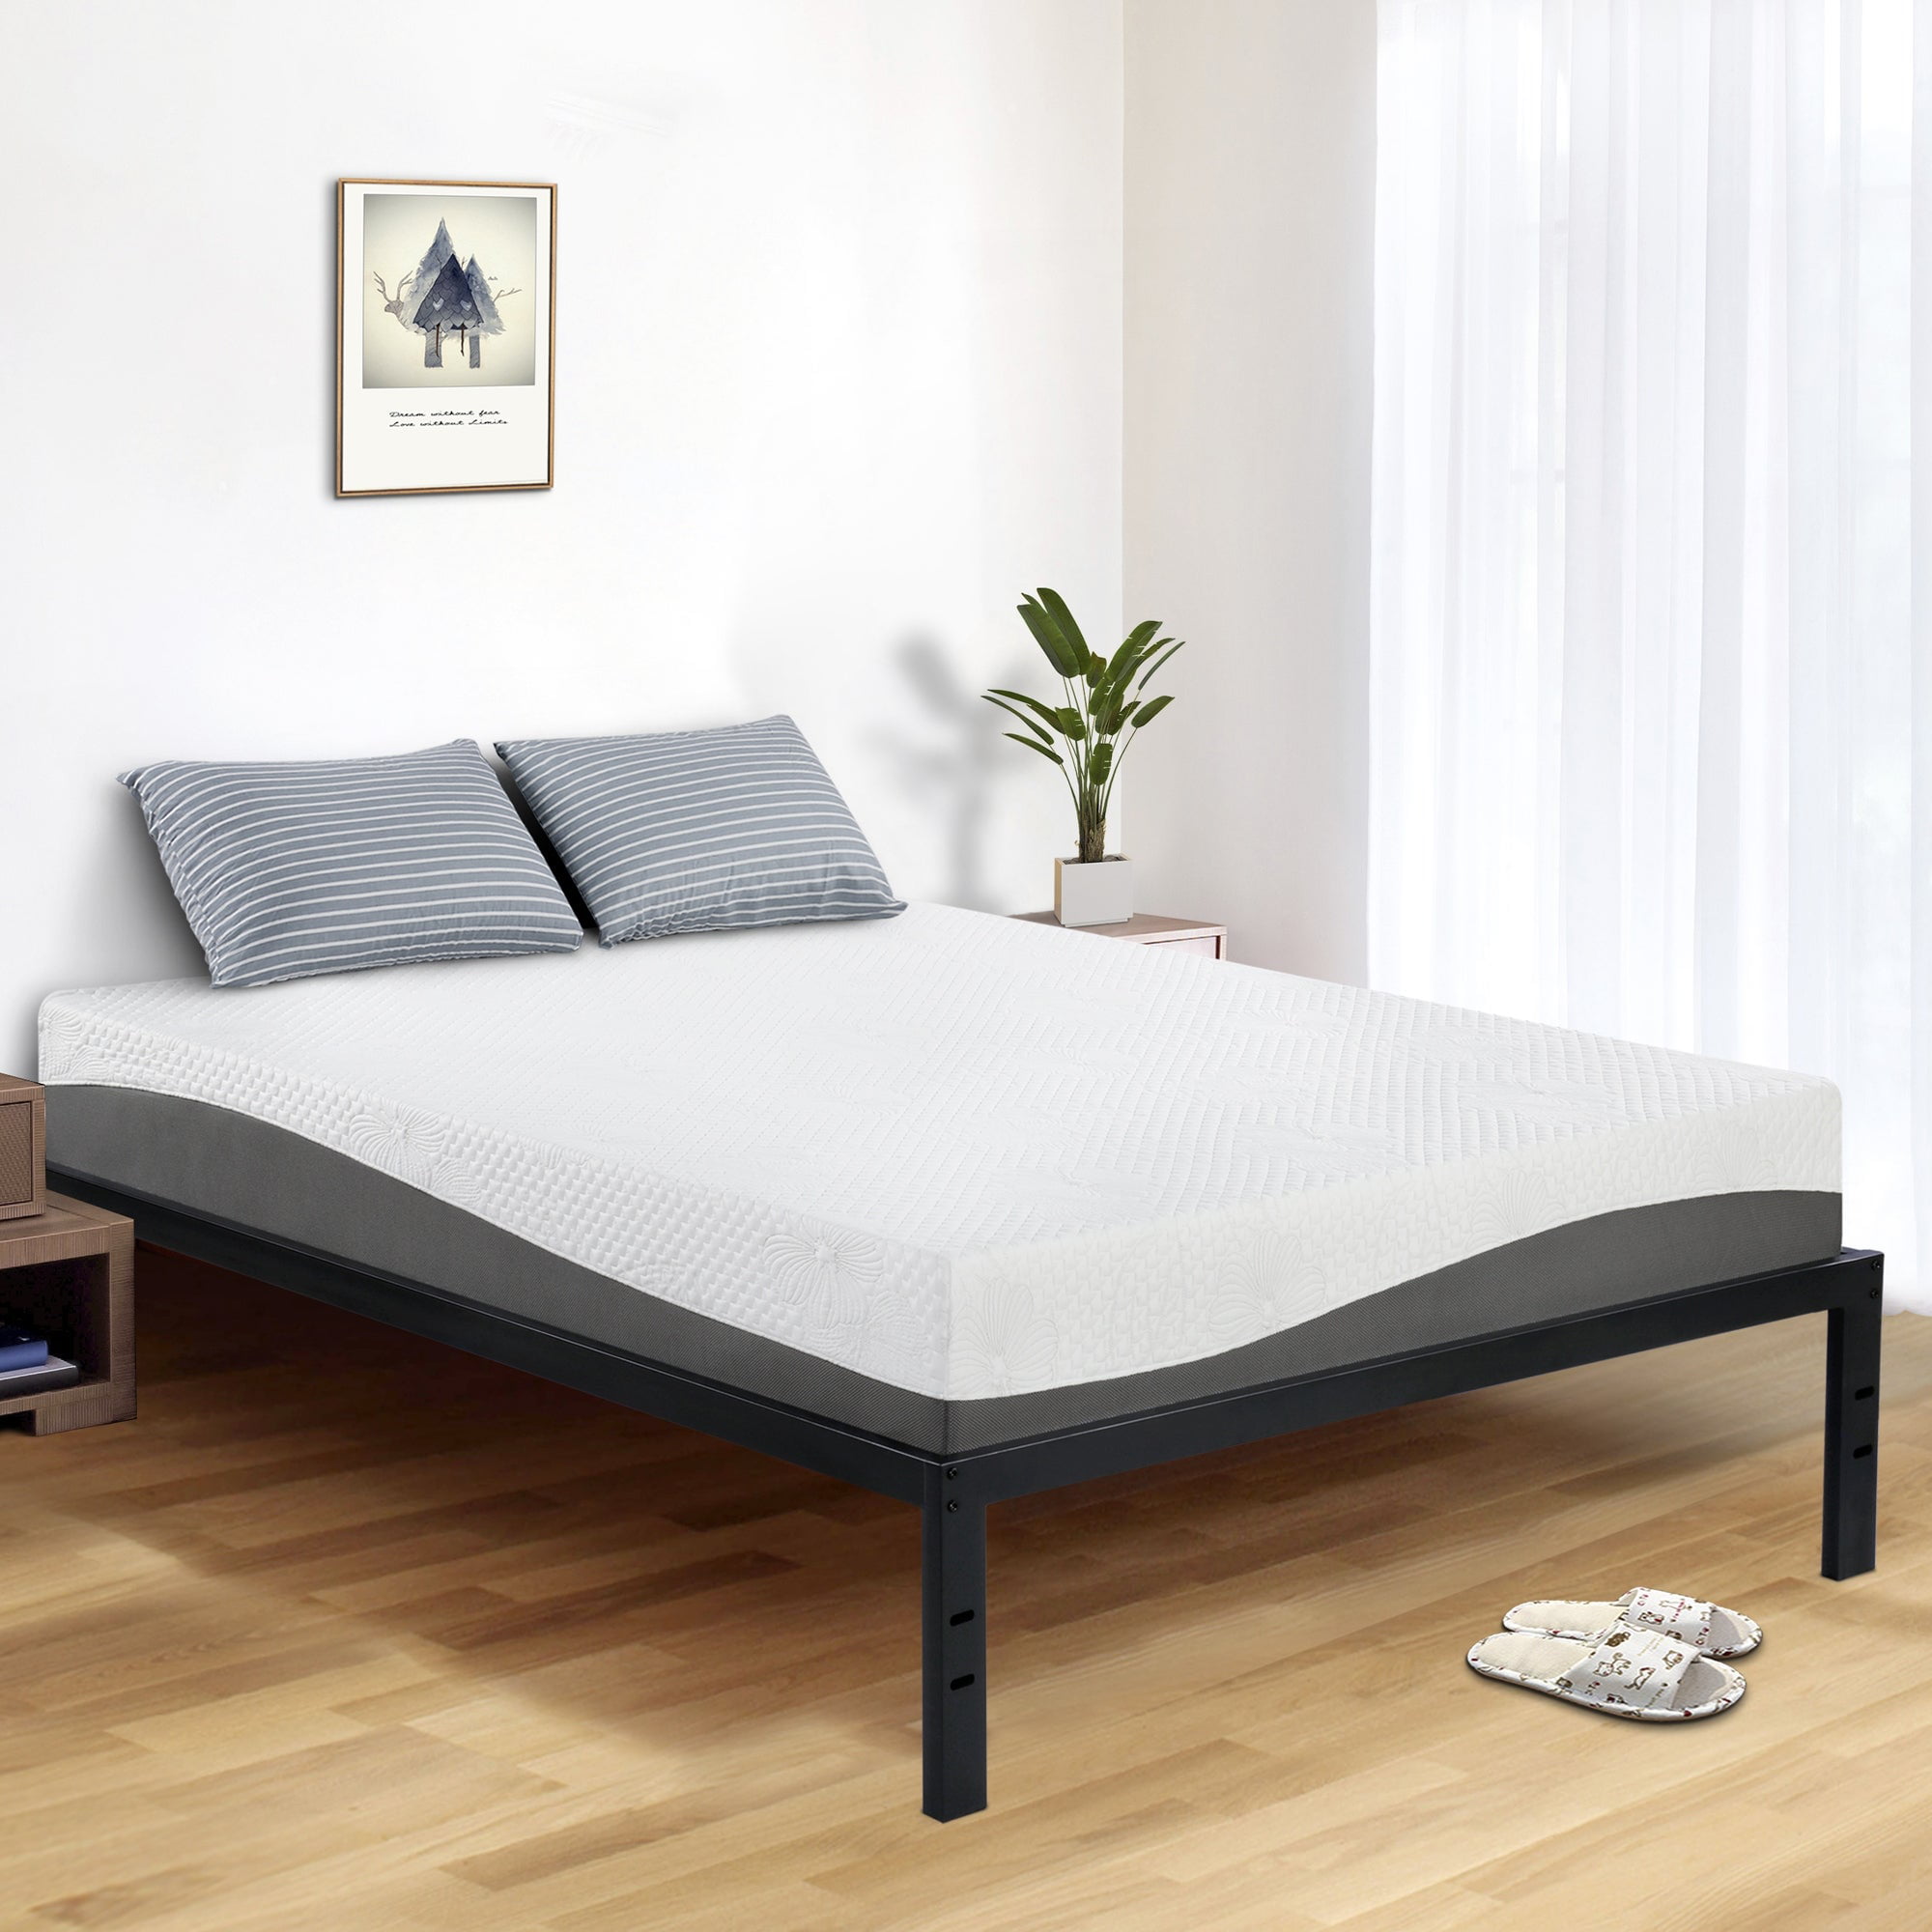 Sleeplanner 18 Inch Tall Heavy Duty, High Profile Bed Frame